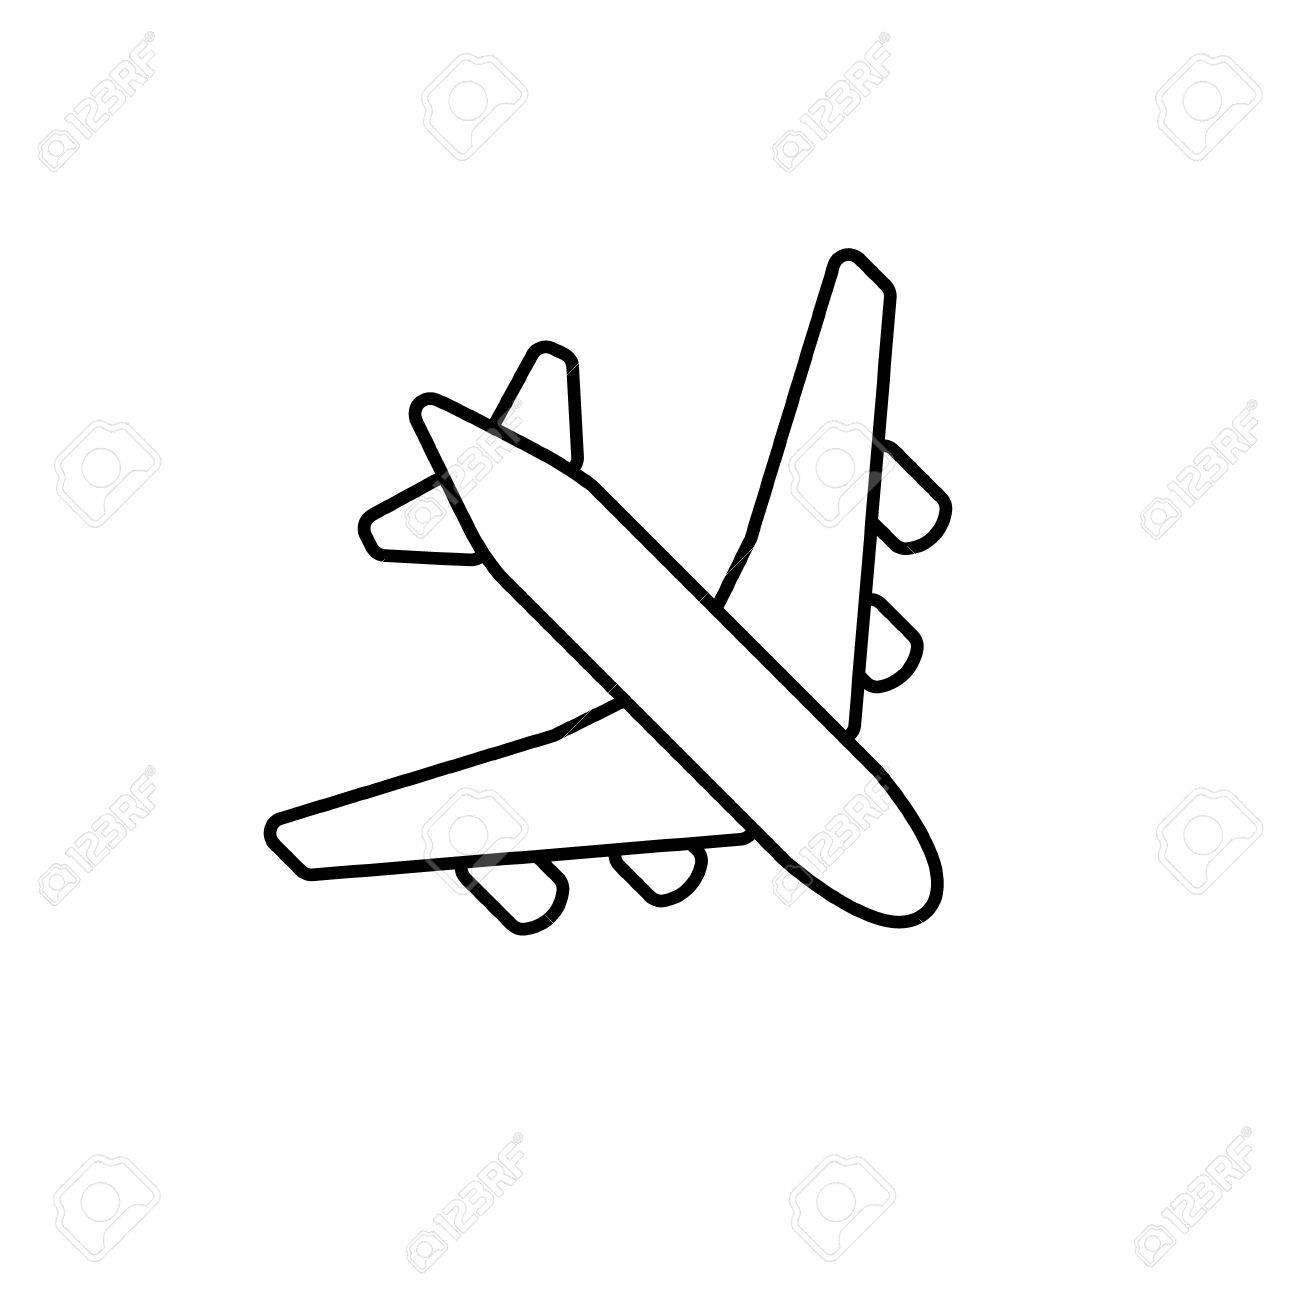 Airplane clipart easy, Airplane easy Transparent FREE for download on ...